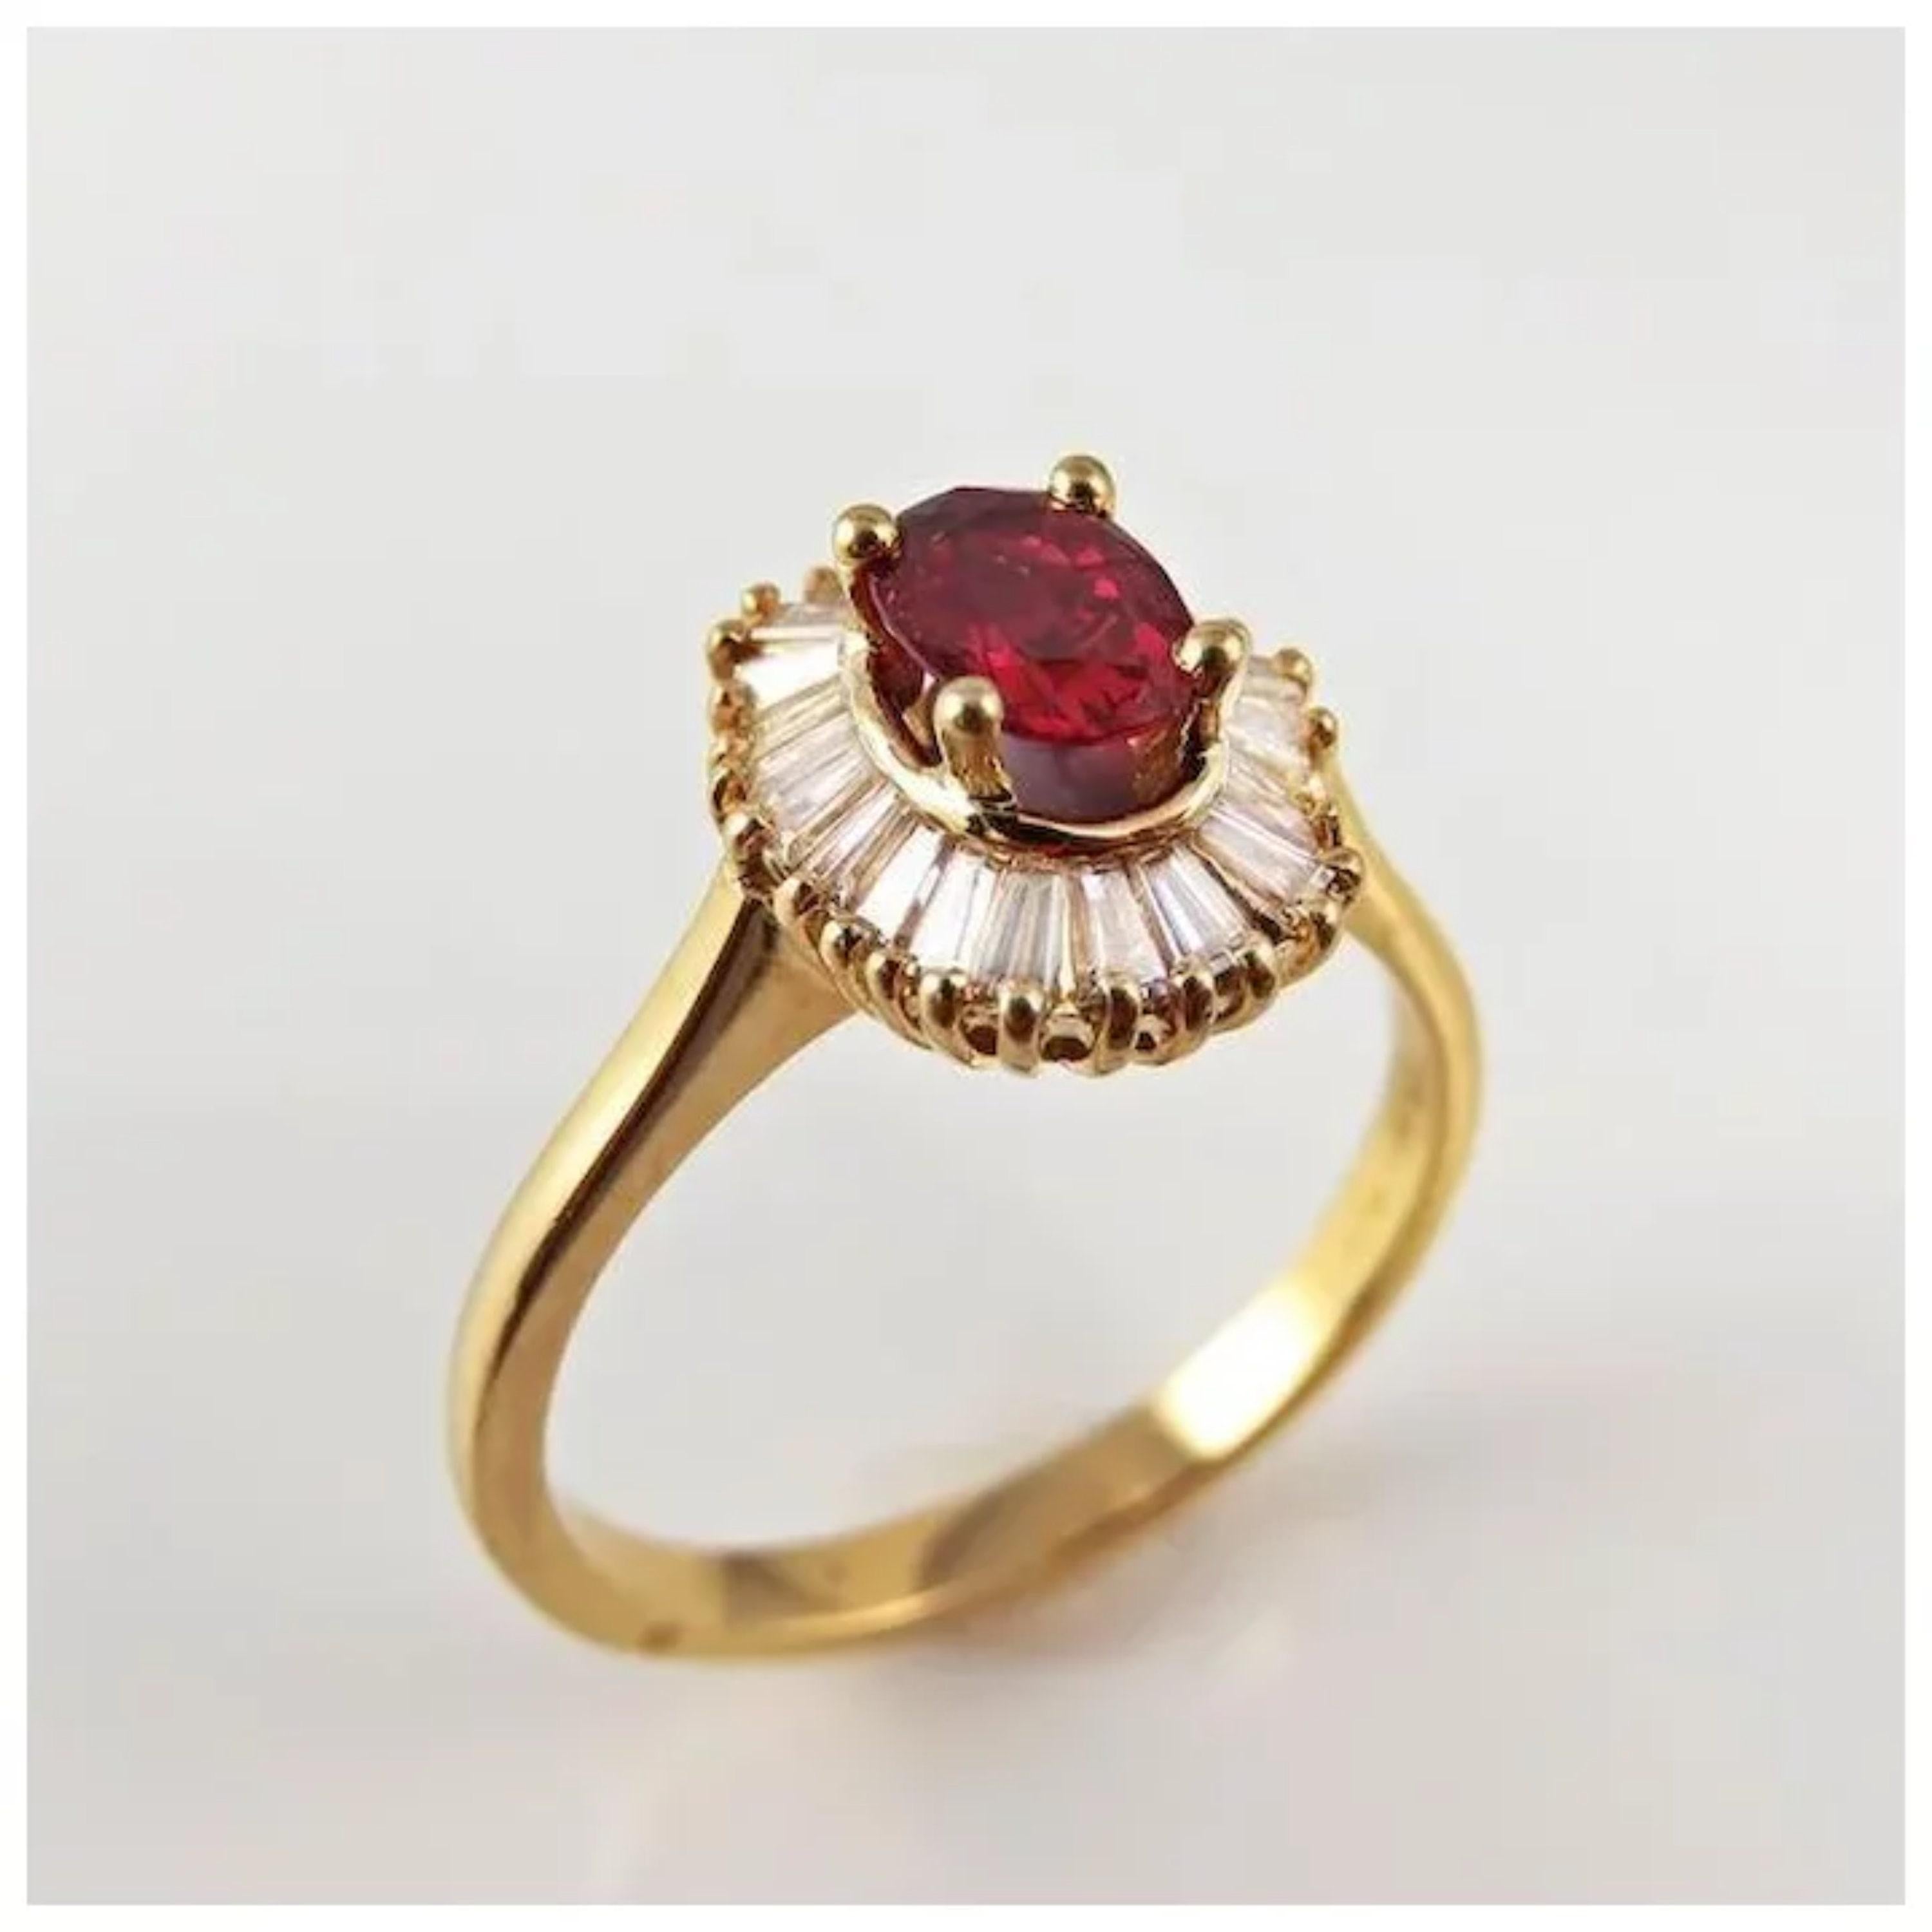 For Sale:  Certified 2.6 Carat Ruby Diamond Engagement Ring Halo Ruby Diamond Cocktail Ring 2